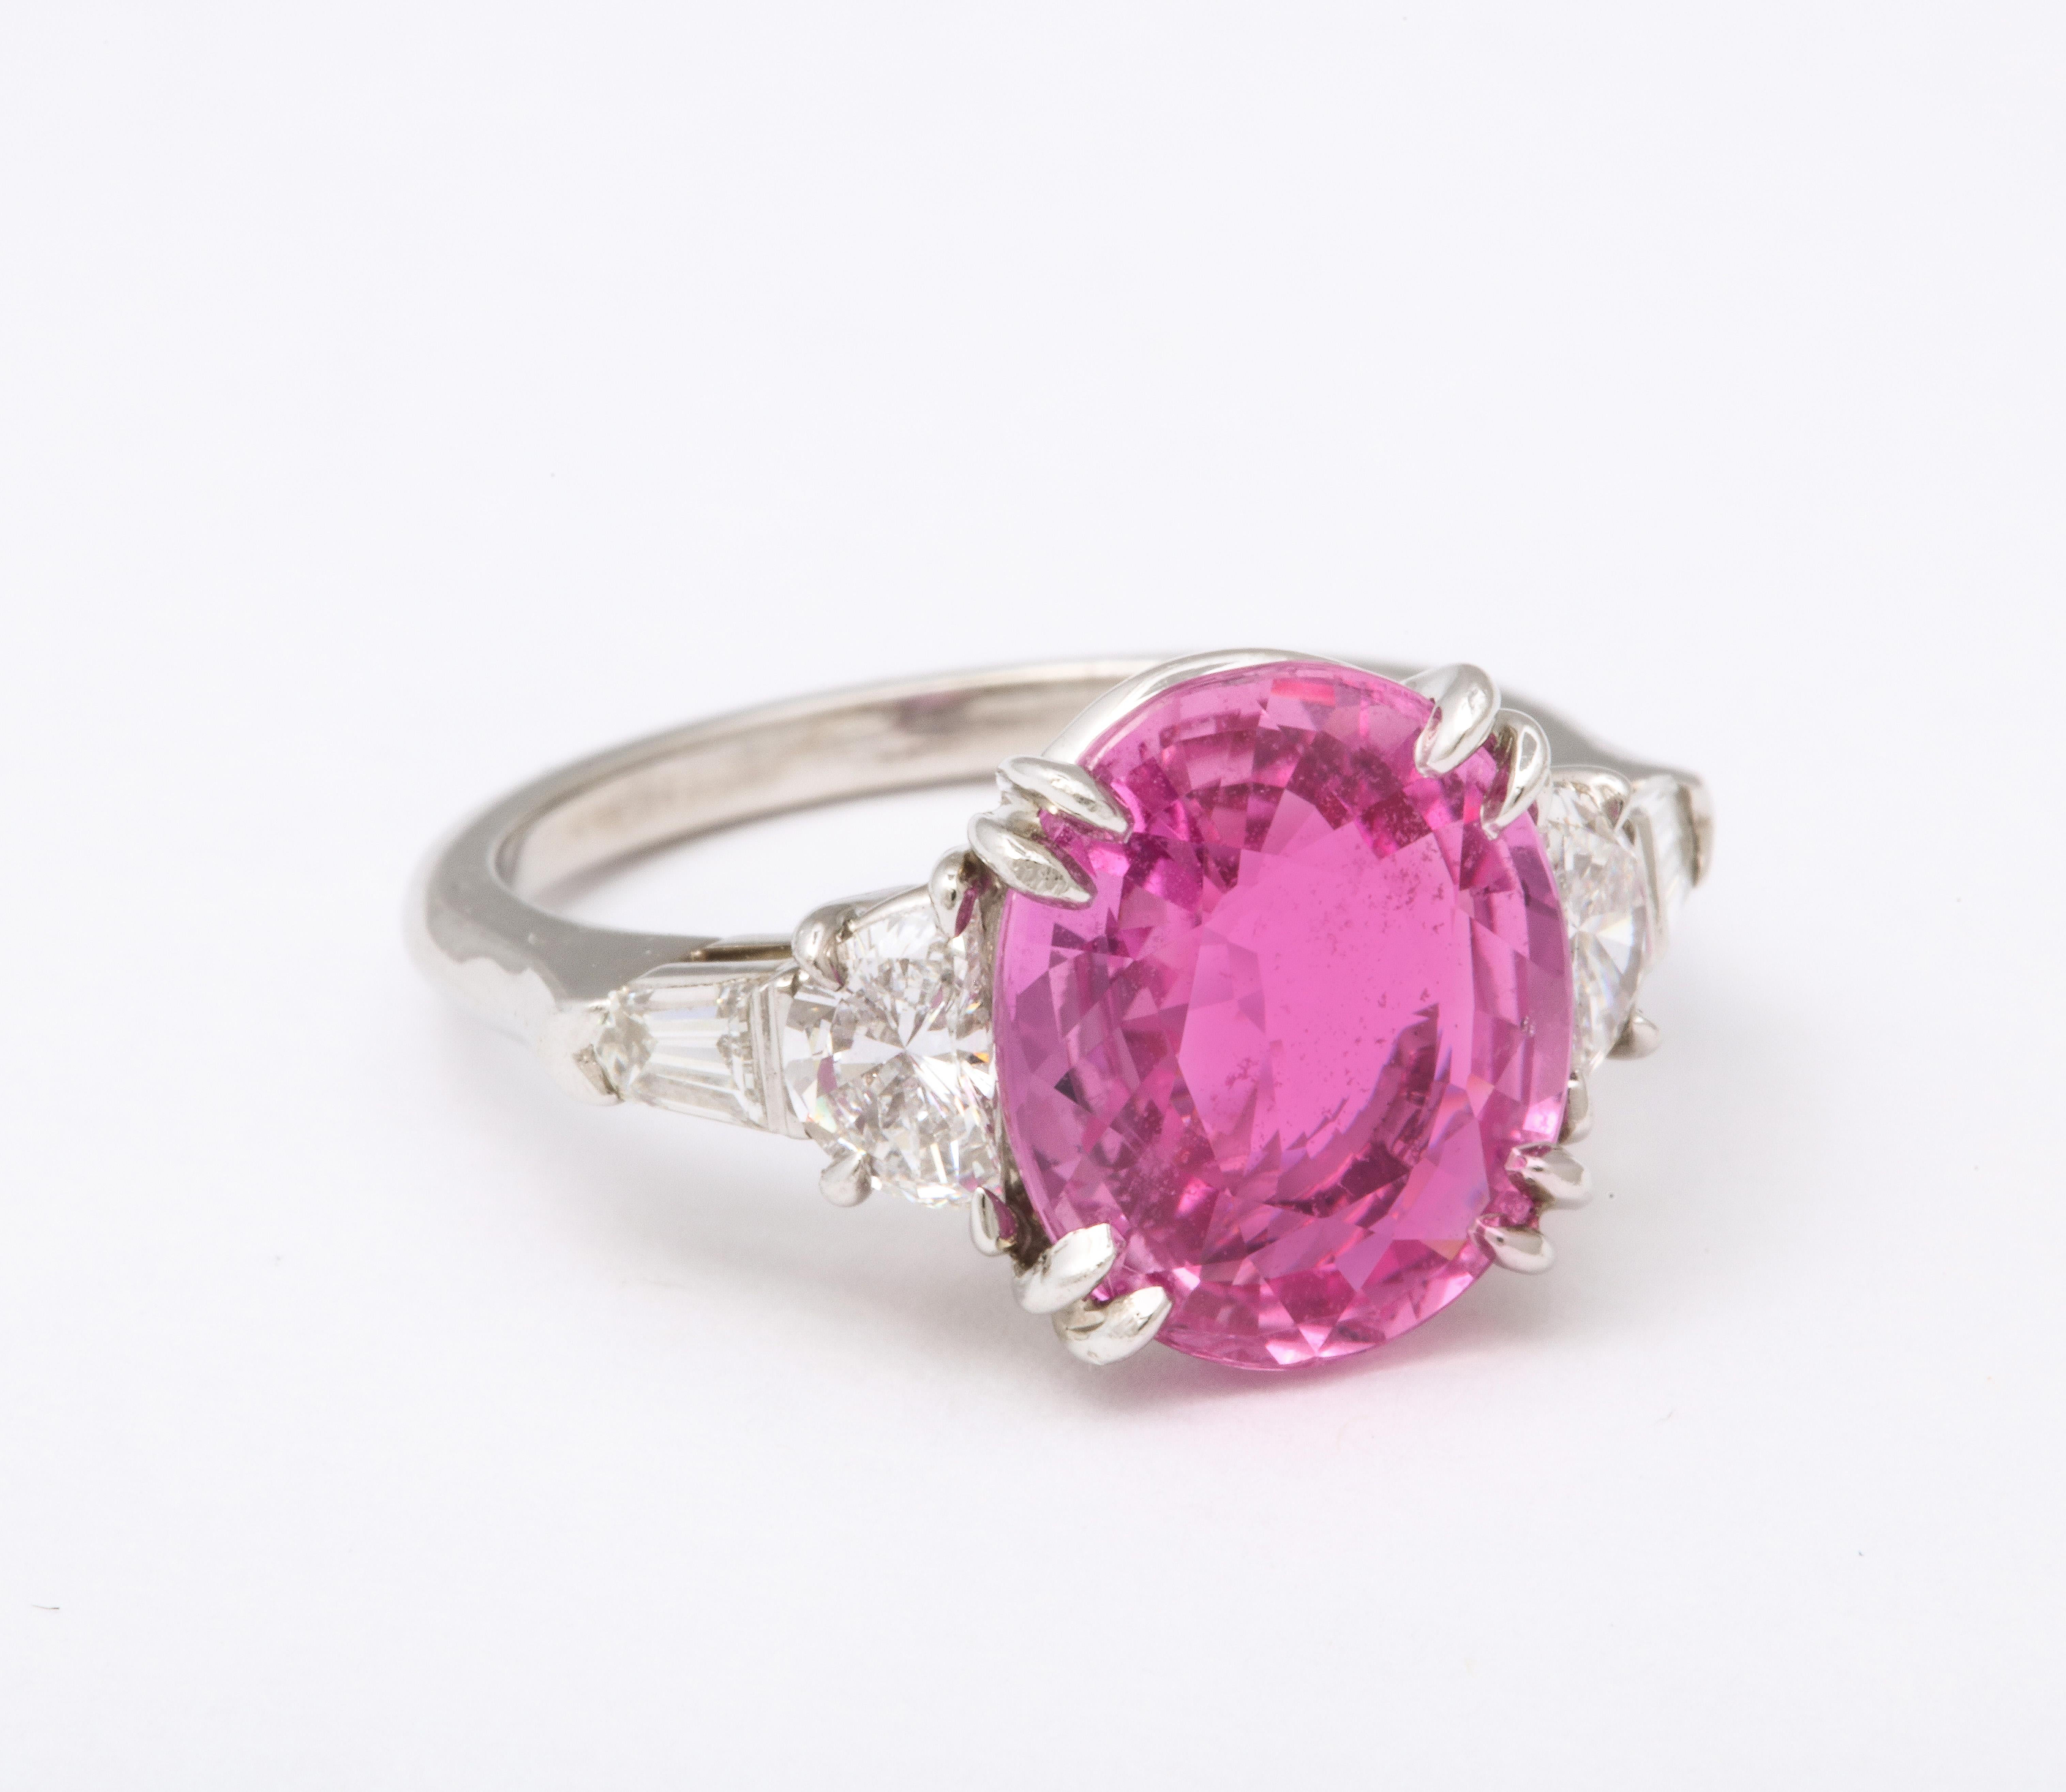 Oval Cut 5 Carat Pink Sapphire and Diamond Ring